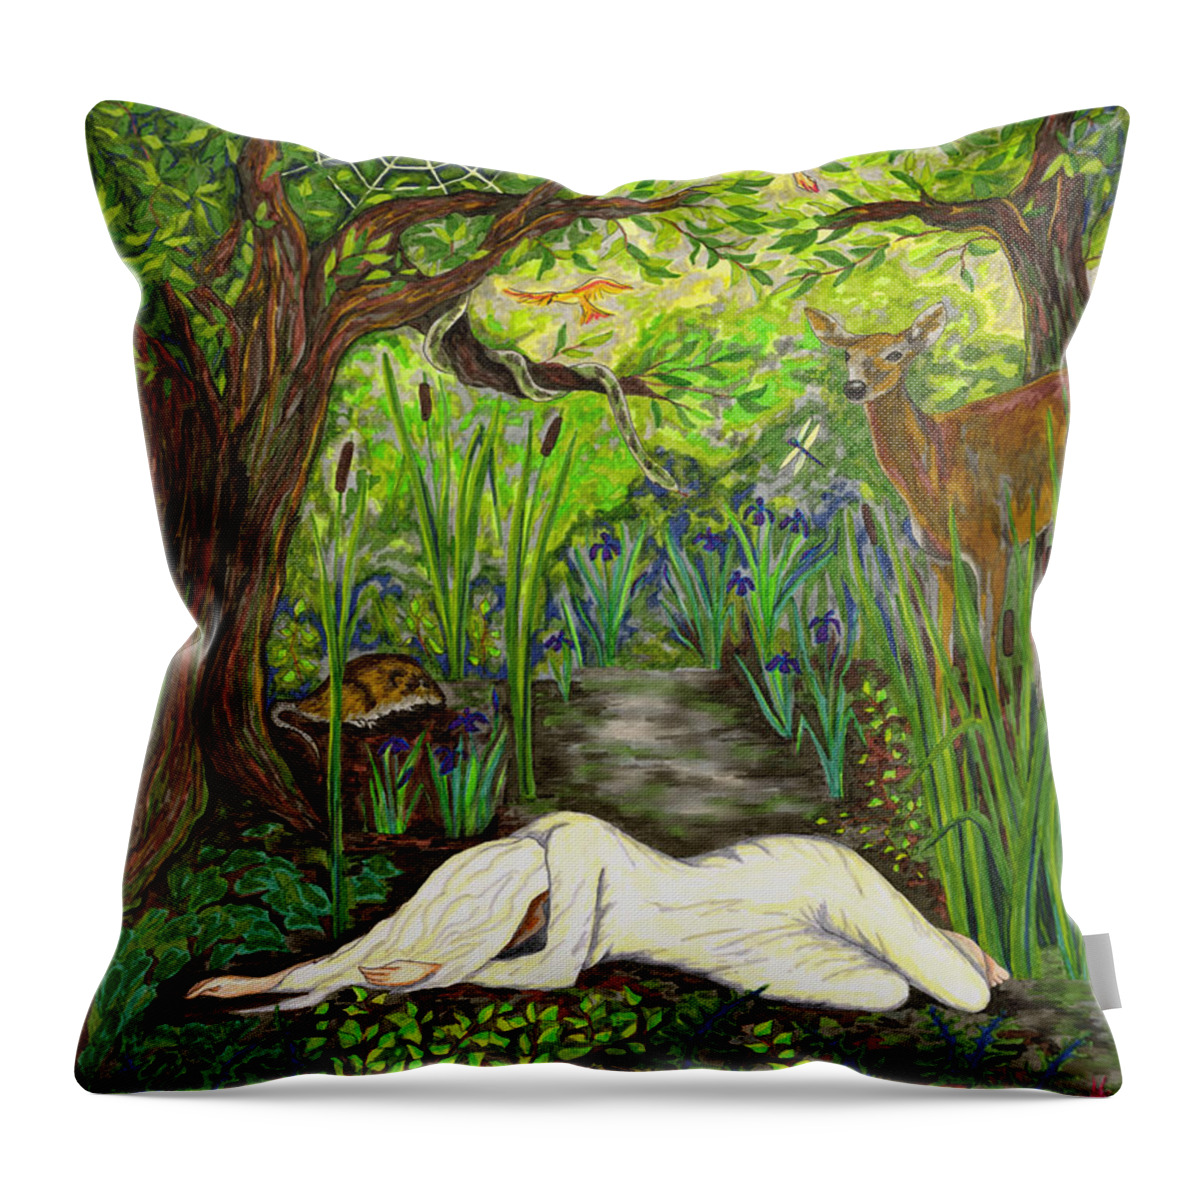 Birds Throw Pillow featuring the drawing Shade Falls by FT McKinstry